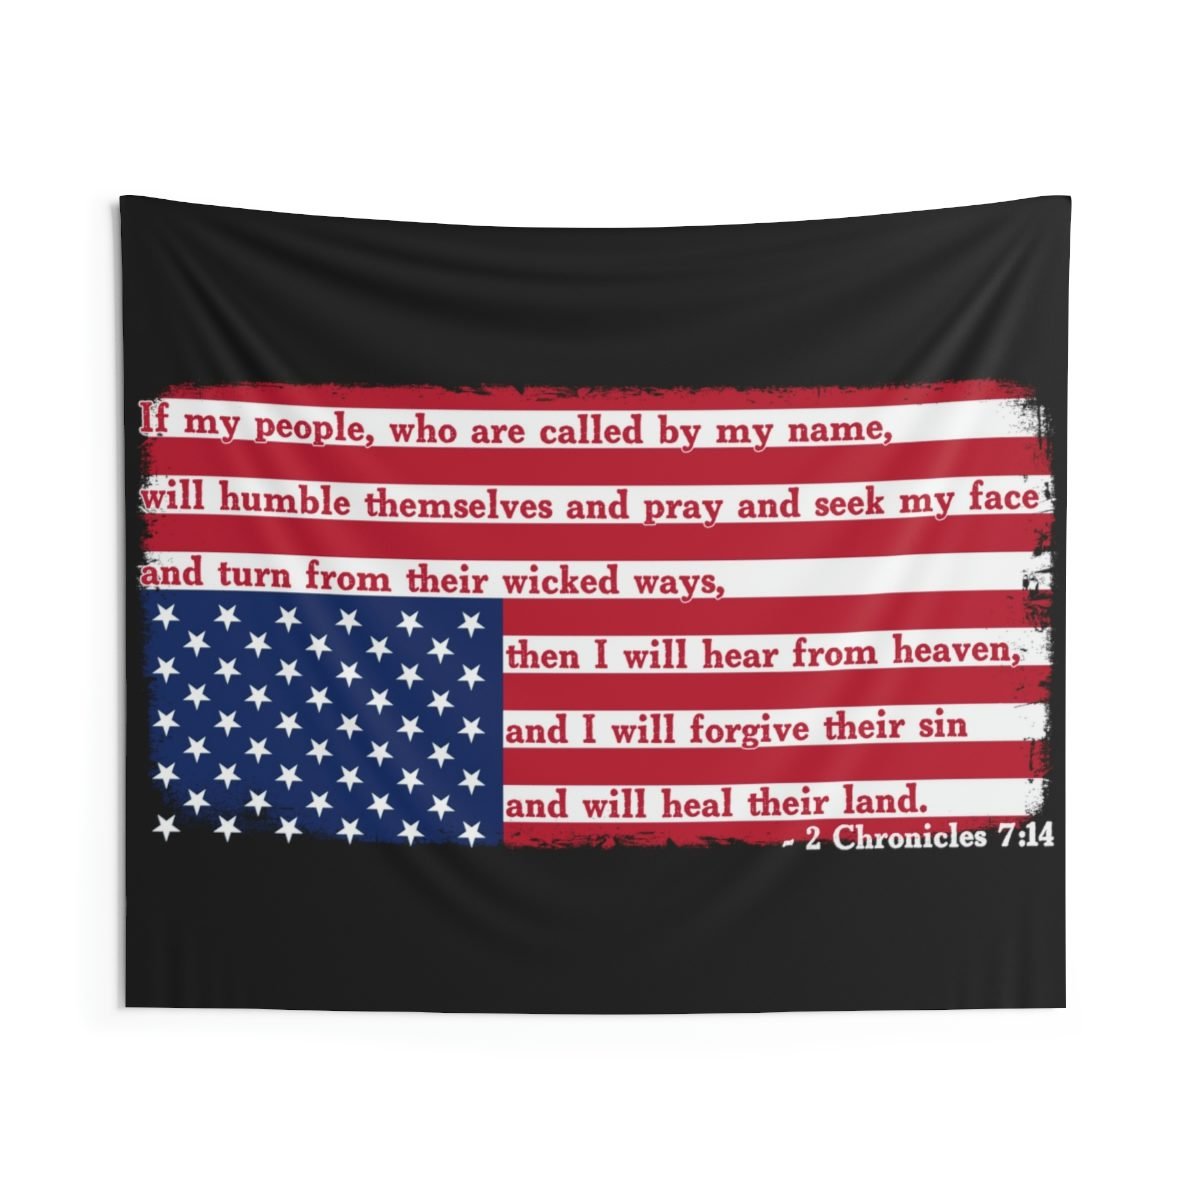 If My People by Radical Truth Designs Indoor Wall Tapestries